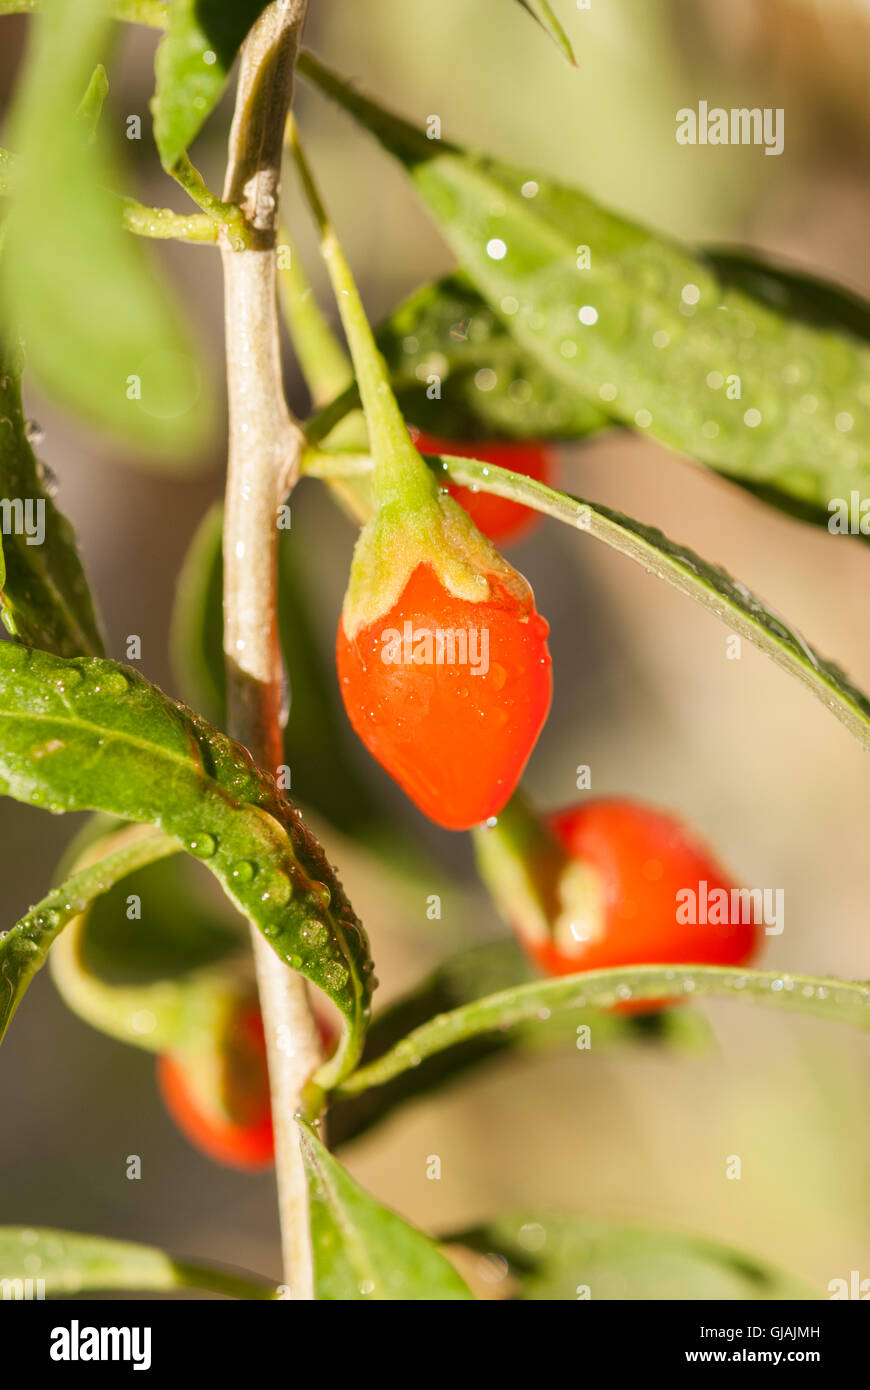 Fresh goji berries on a twig with drops of water after rain closeup. Stock Photo